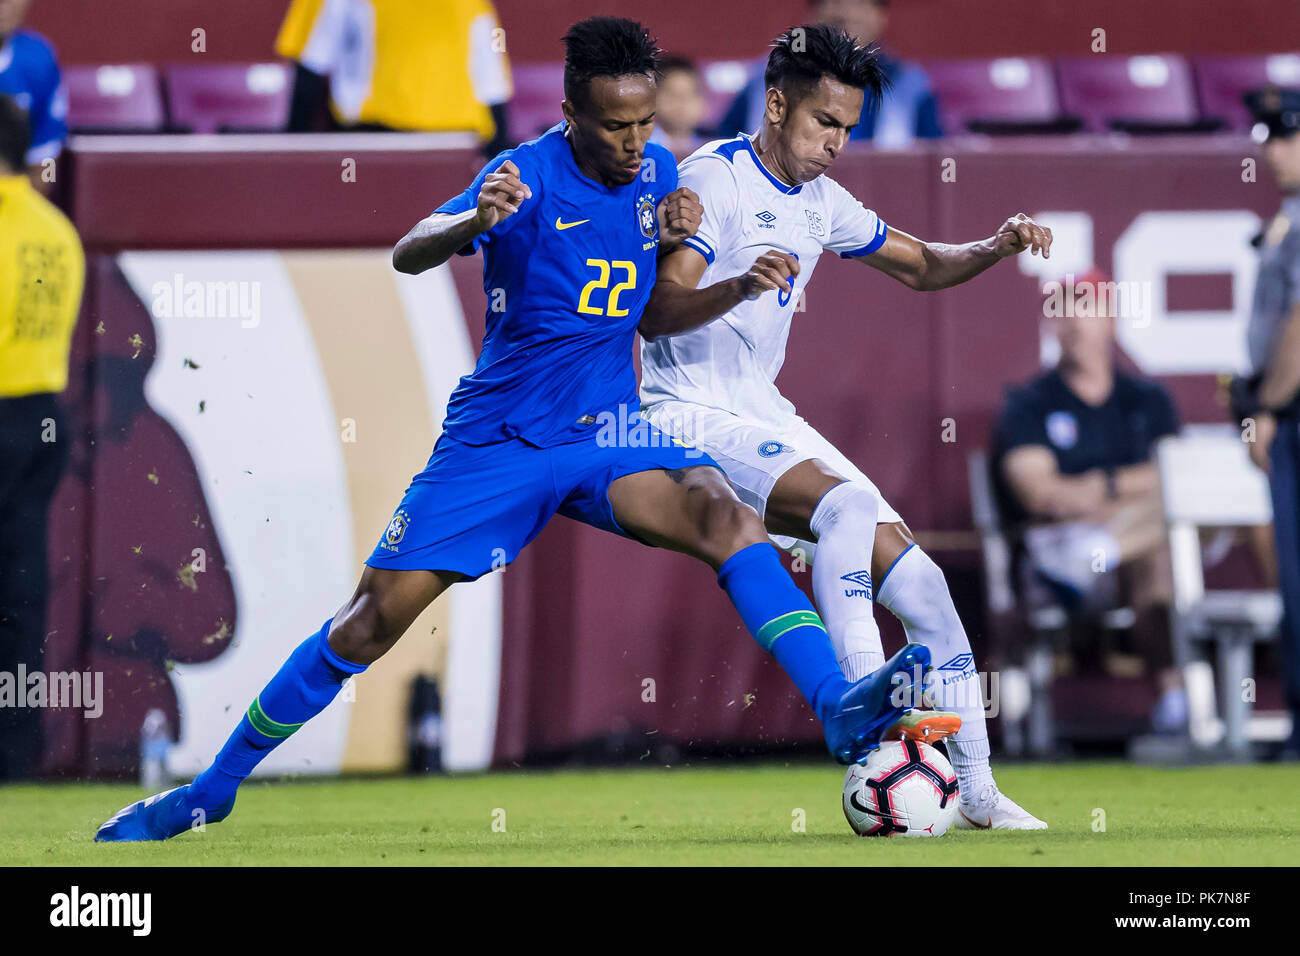 Landover, Maryland, USA. 11th Sep, 2018. El Salvador midfielder Denis Omar Pineda Torres (8) and Brazil defender Eder Militao (22) vie for the ball during the second half of an International Friendly match between Brazil and El Salvador at FedExField in Landover, Maryland. Scott Taetsch/CSM/Alamy Live News Stock Photo